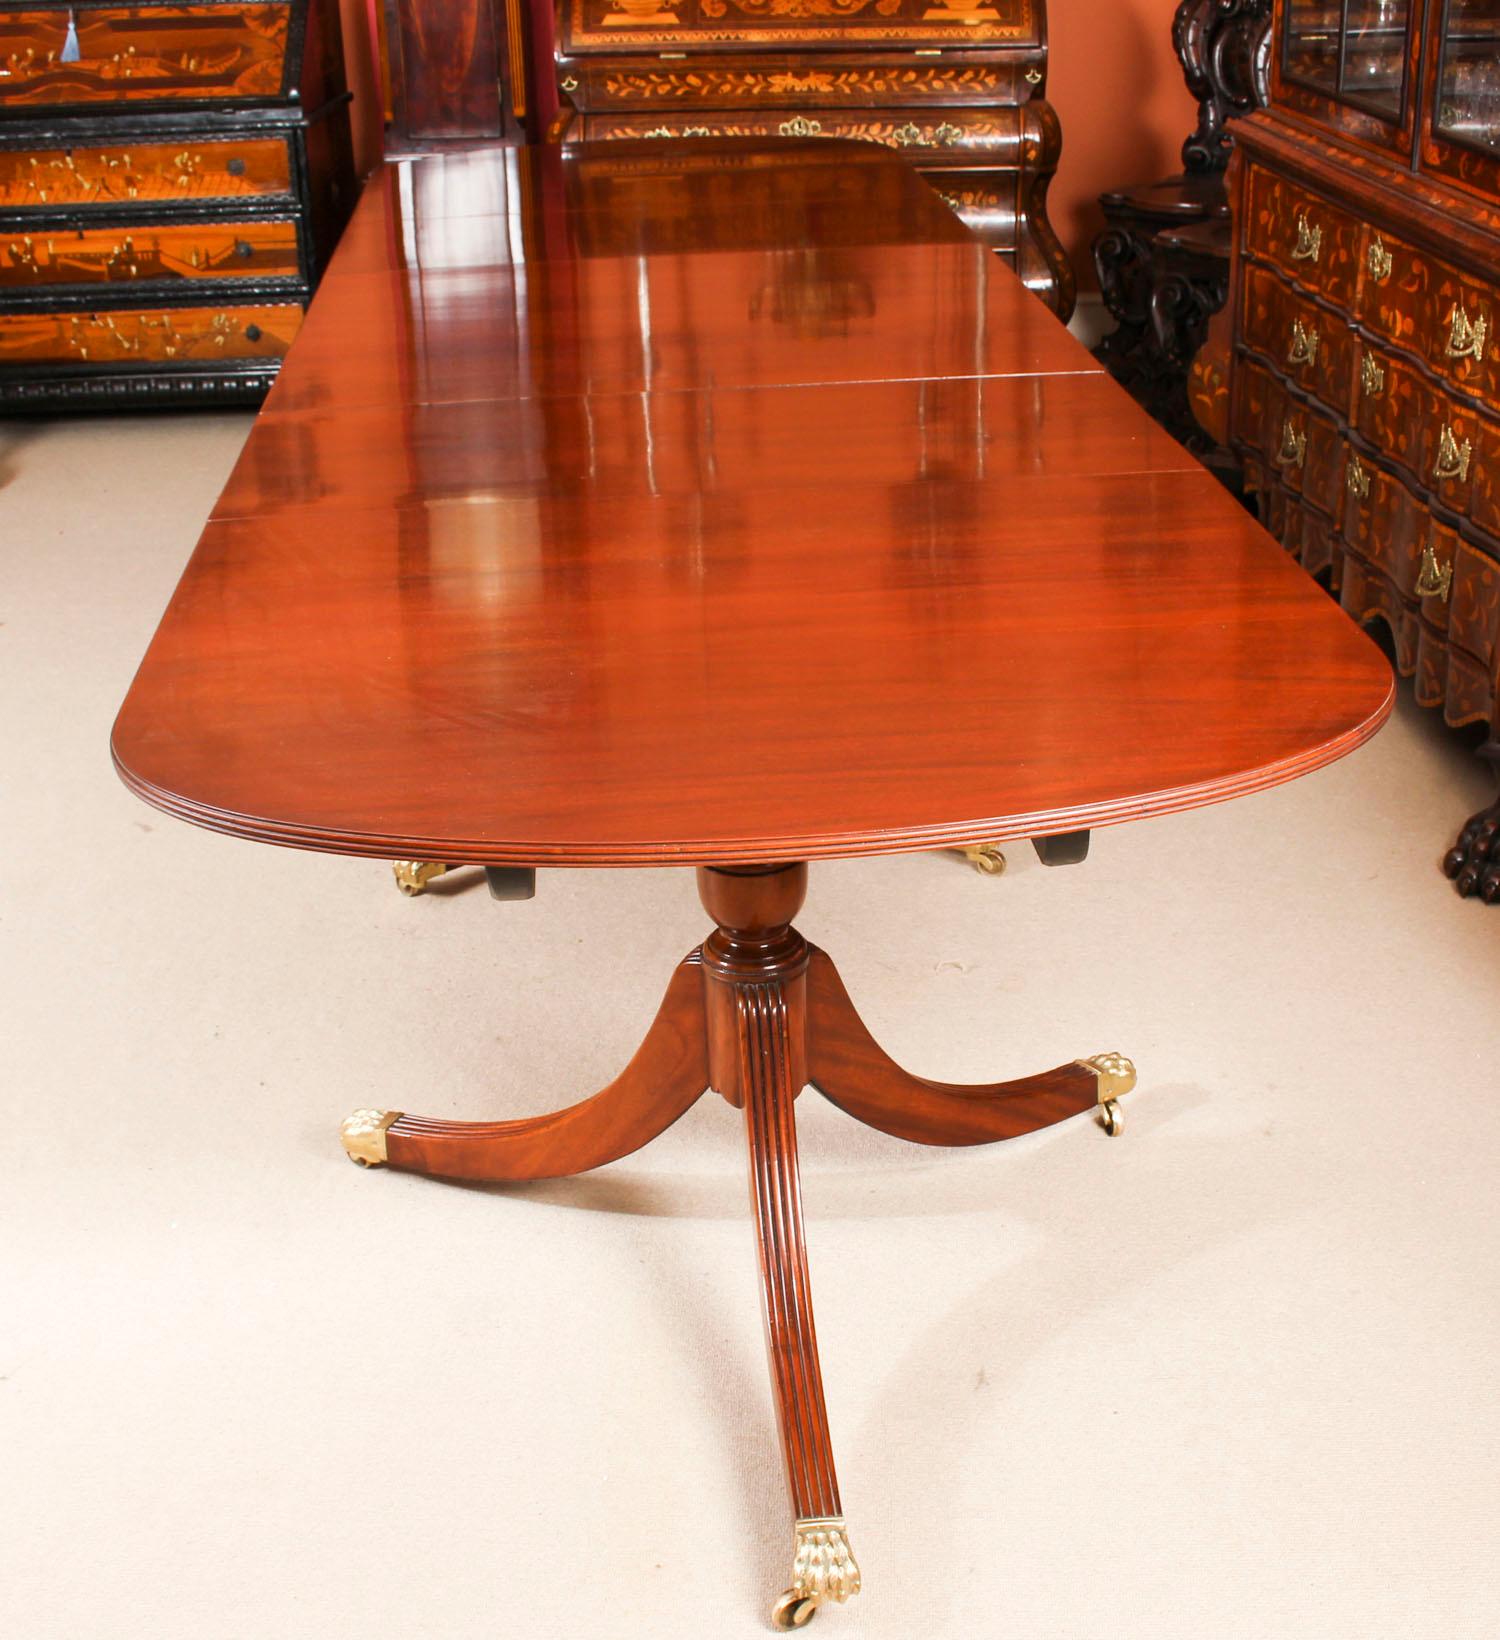 This is a fantastic vintage Regency Revival dining table by the master cabinet maker William Tillman, circa 1980 in date.

It is made of stunning solid flame mahogany and is raised on three turned columns, two on triple swept sabre leg bases and the